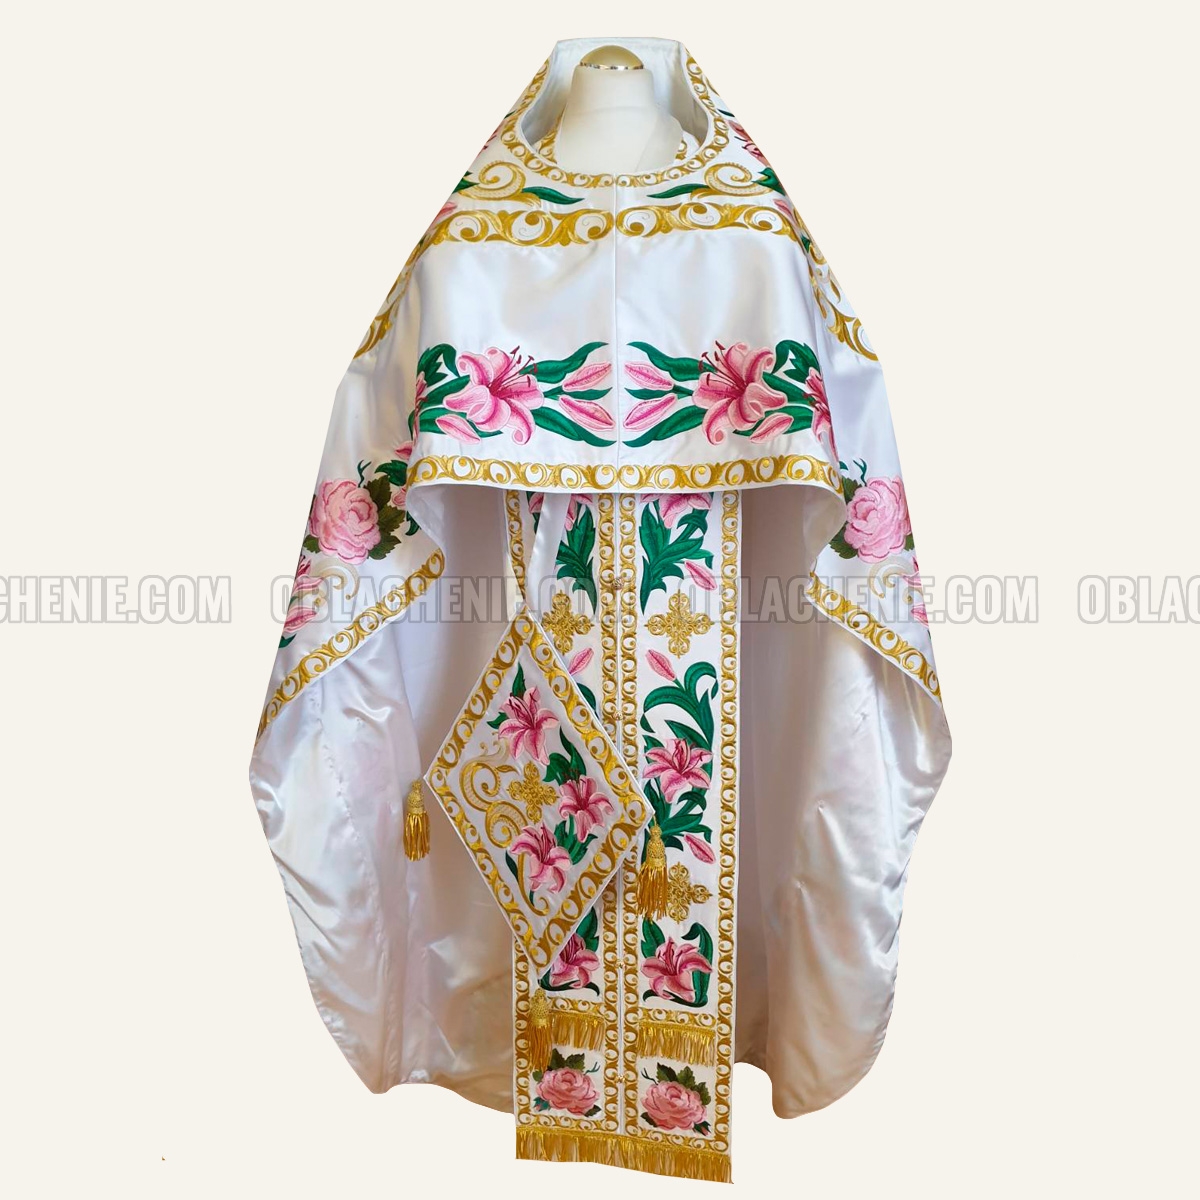 EMBROIDERED PRIEST'S VESTMENTS 11019